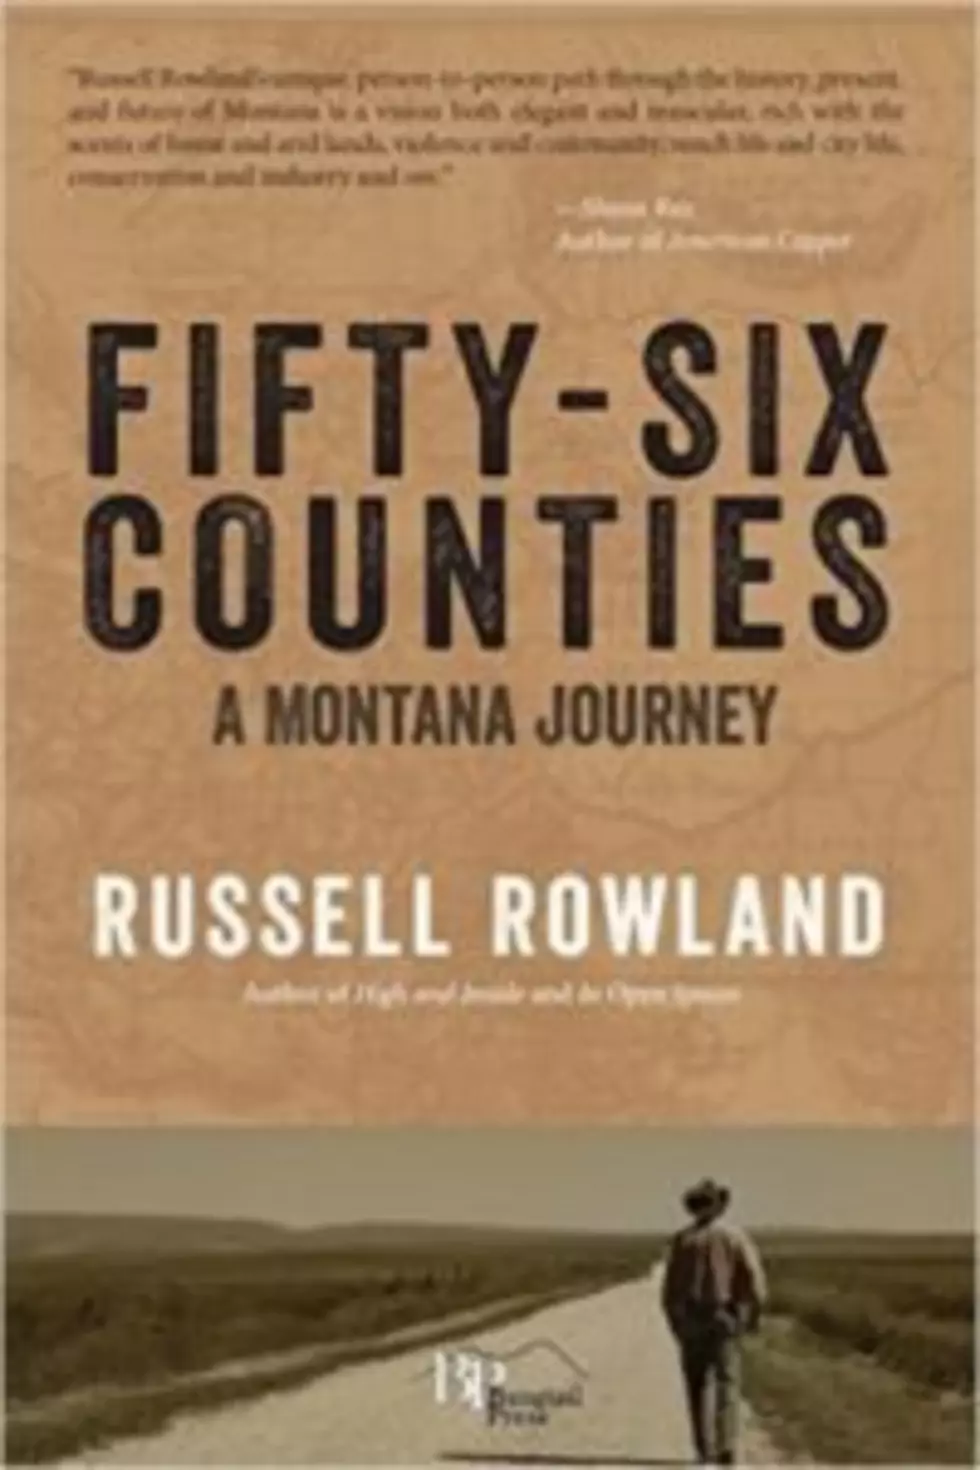 A native son hits the road in search of Montana&#8217;s spirit